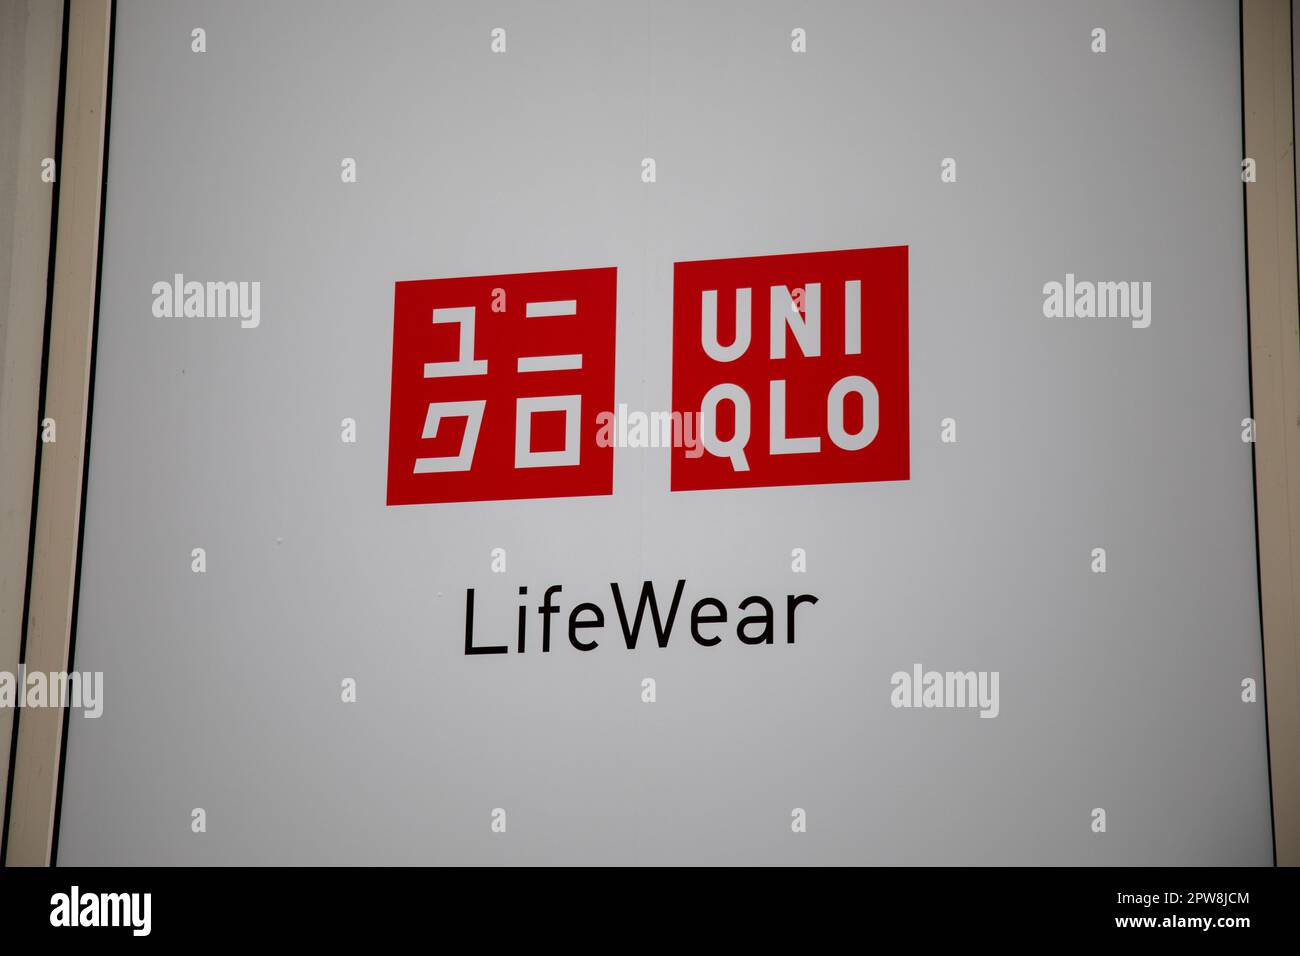 Lifewear Projects  Photos videos logos illustrations and branding on  Behance